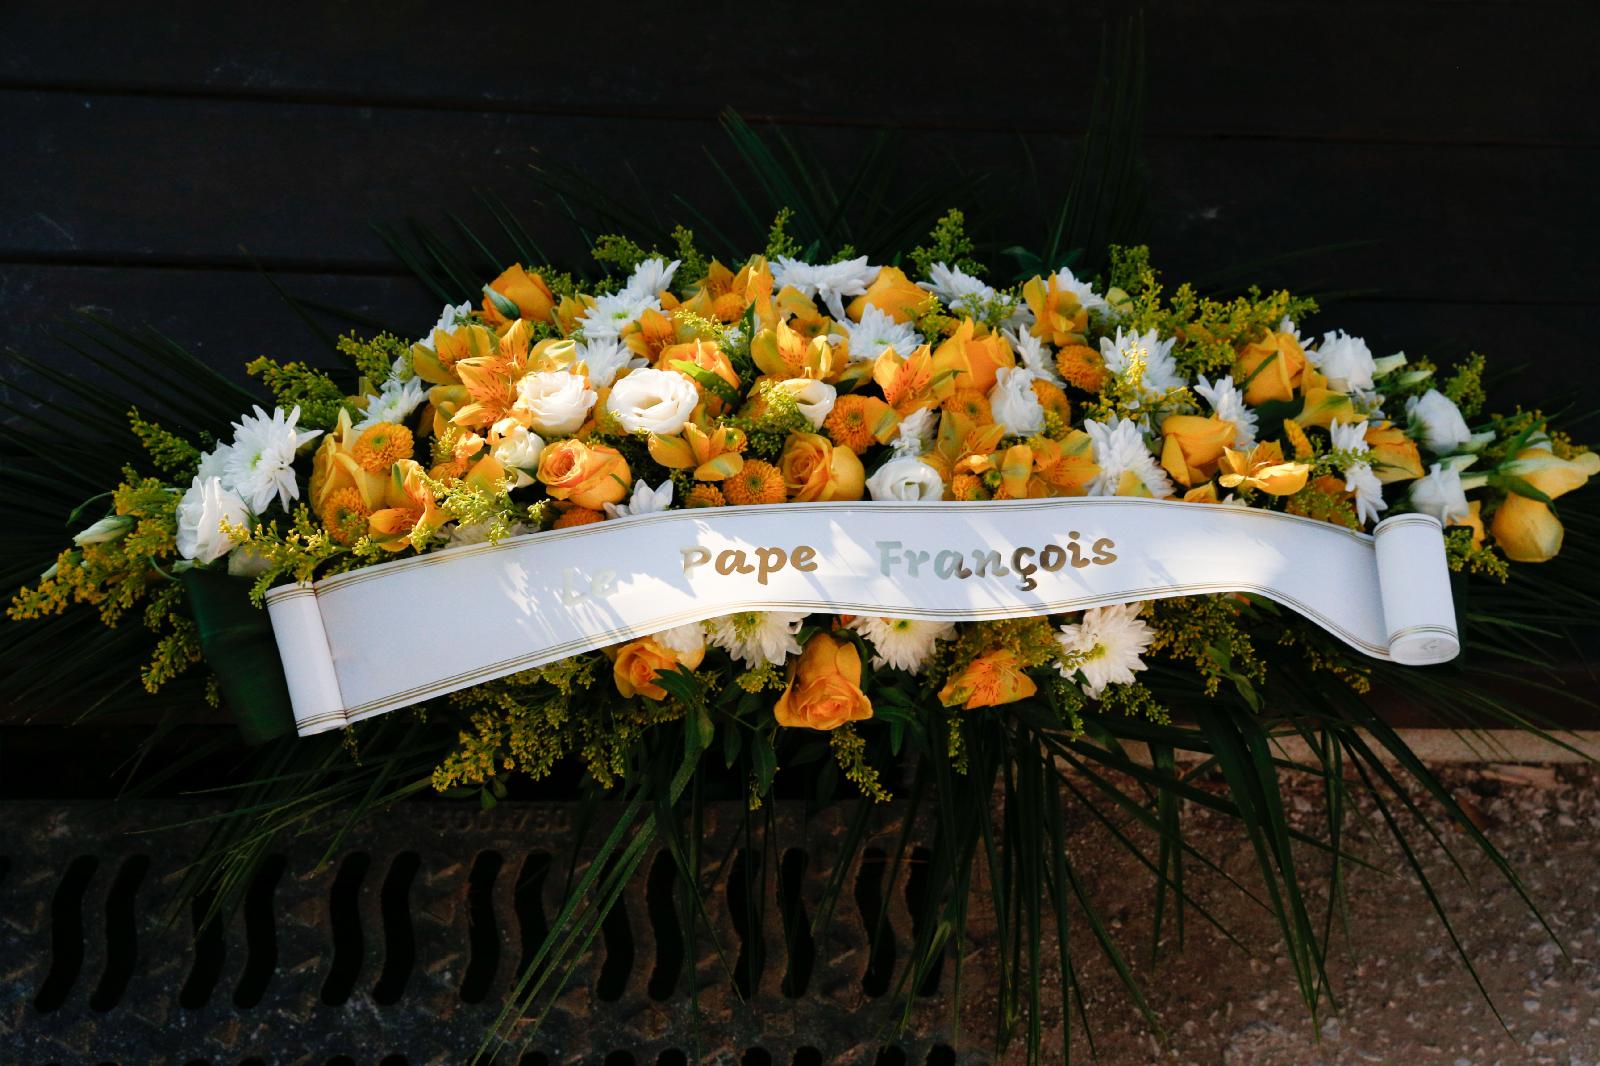 Wreath left by pope